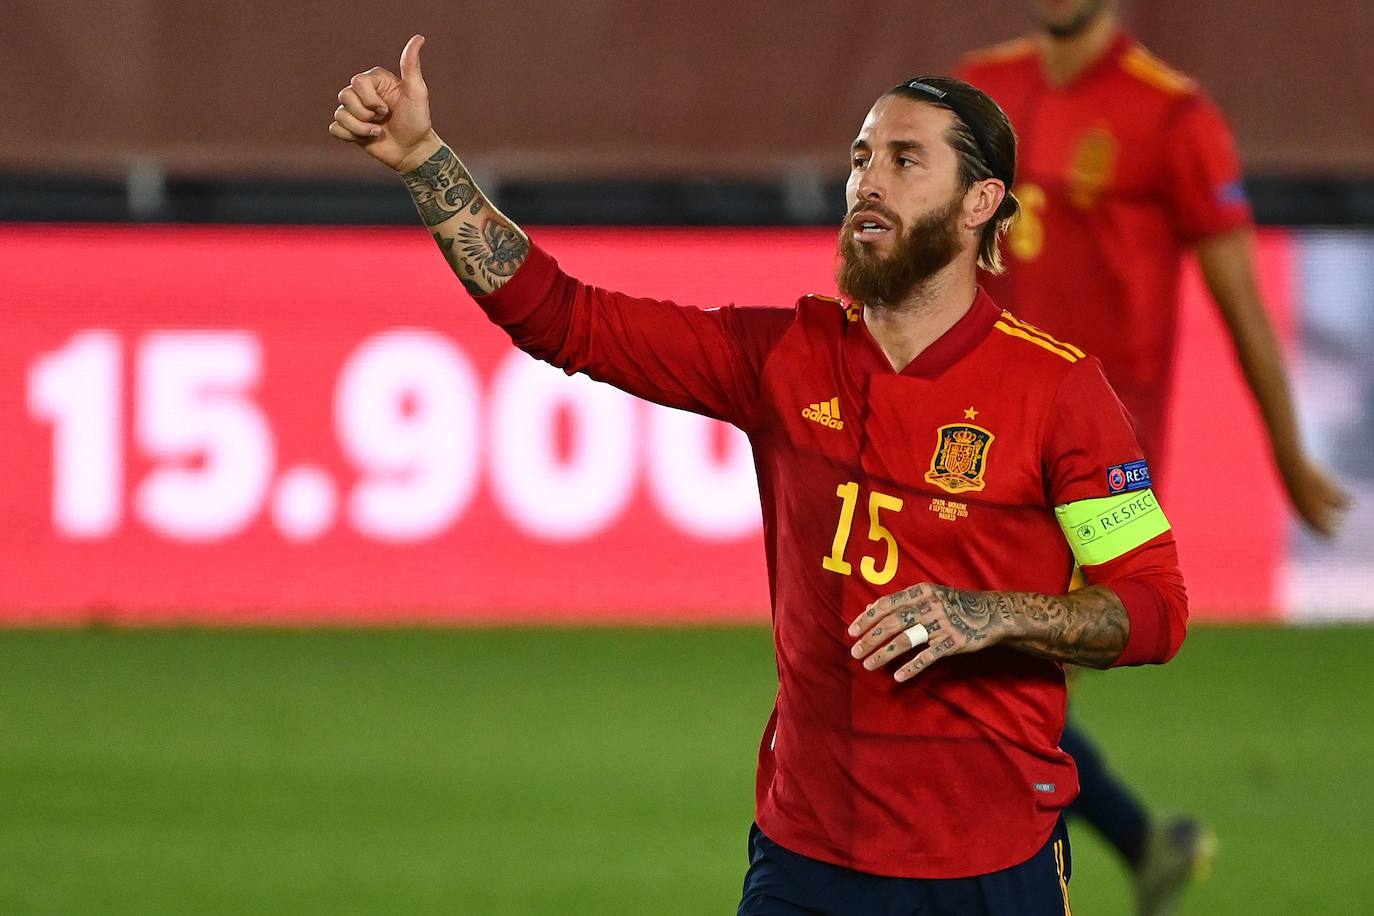 Sergio Ramos during a UEFA Nations League match in 2020.